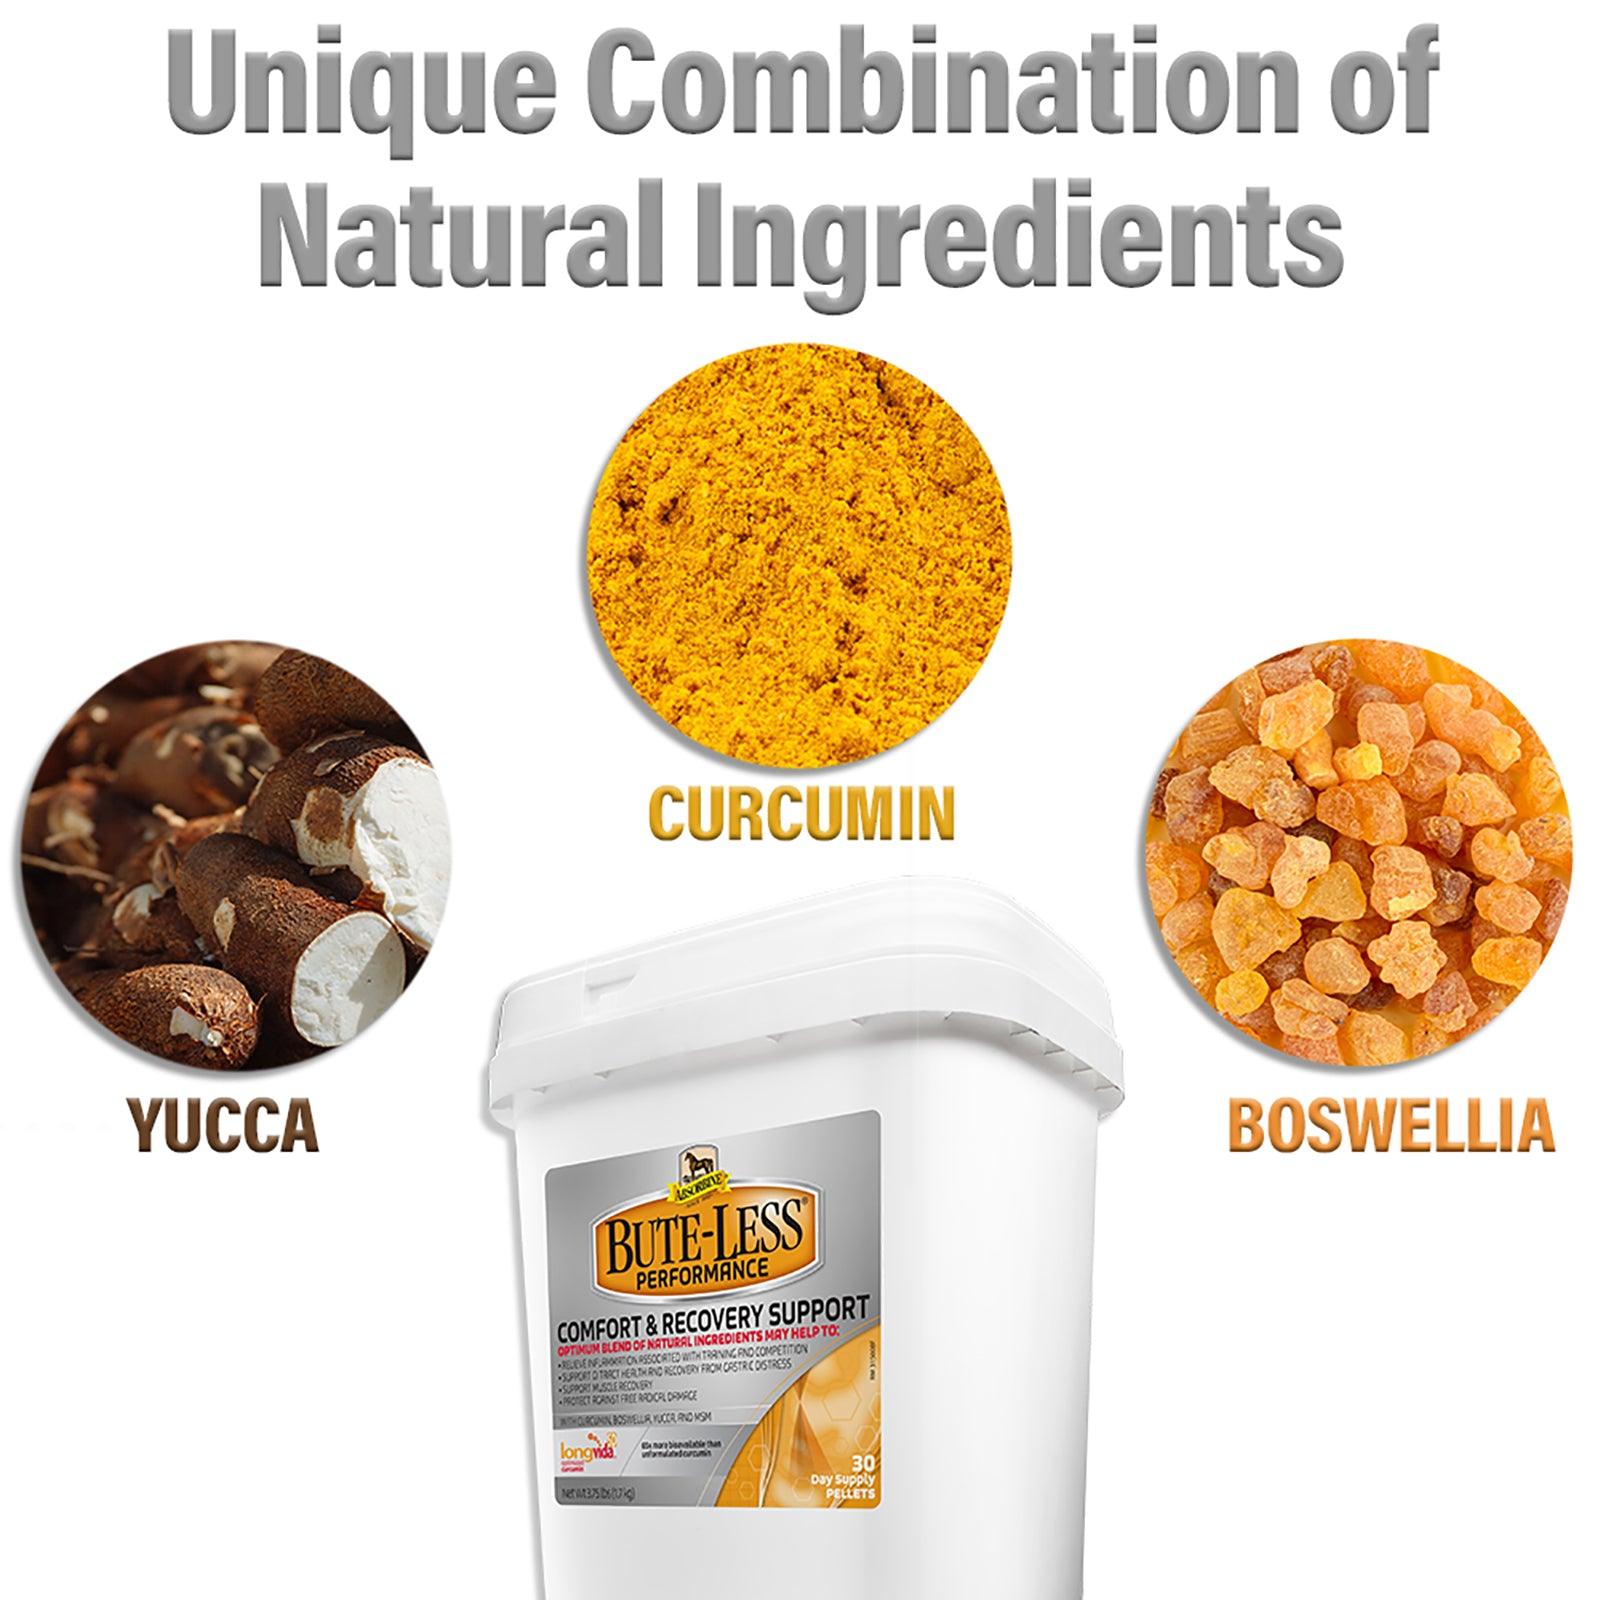 Absorbine Bute-less Performance a unique combination of natural ingredients.  Contains Yucca, Curcumin, and Boswellia.